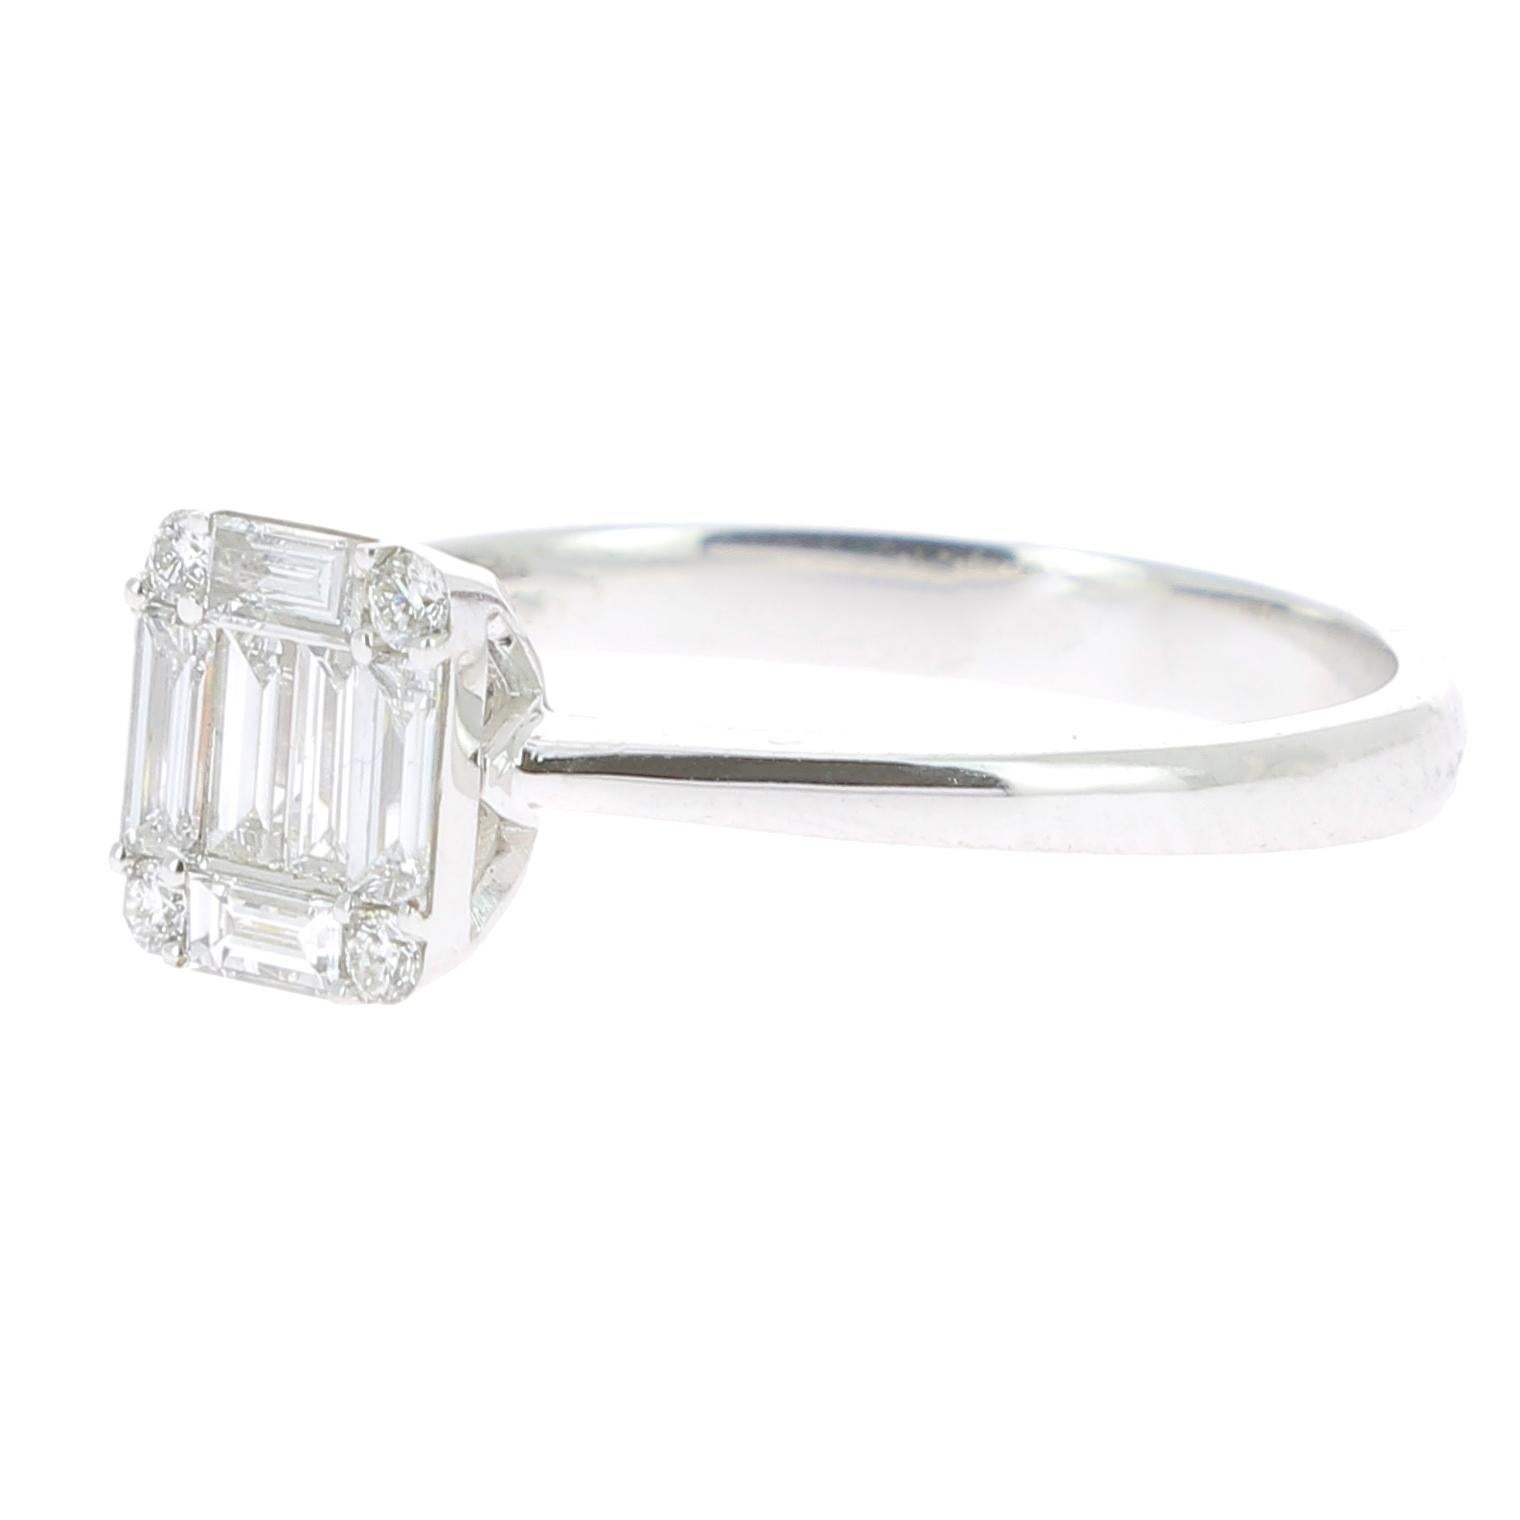 An unique Illusion Diamonds Ring set with Round Diamonds and Baguettes Diamonds giving the impression of One Emerald Cut Diamond.
The ring is set with 6 Baguettes Diamonds weighing 0.36 Carat, 4 Round Diamonds weighing 0.06 Carat 
Totaly the Diamond